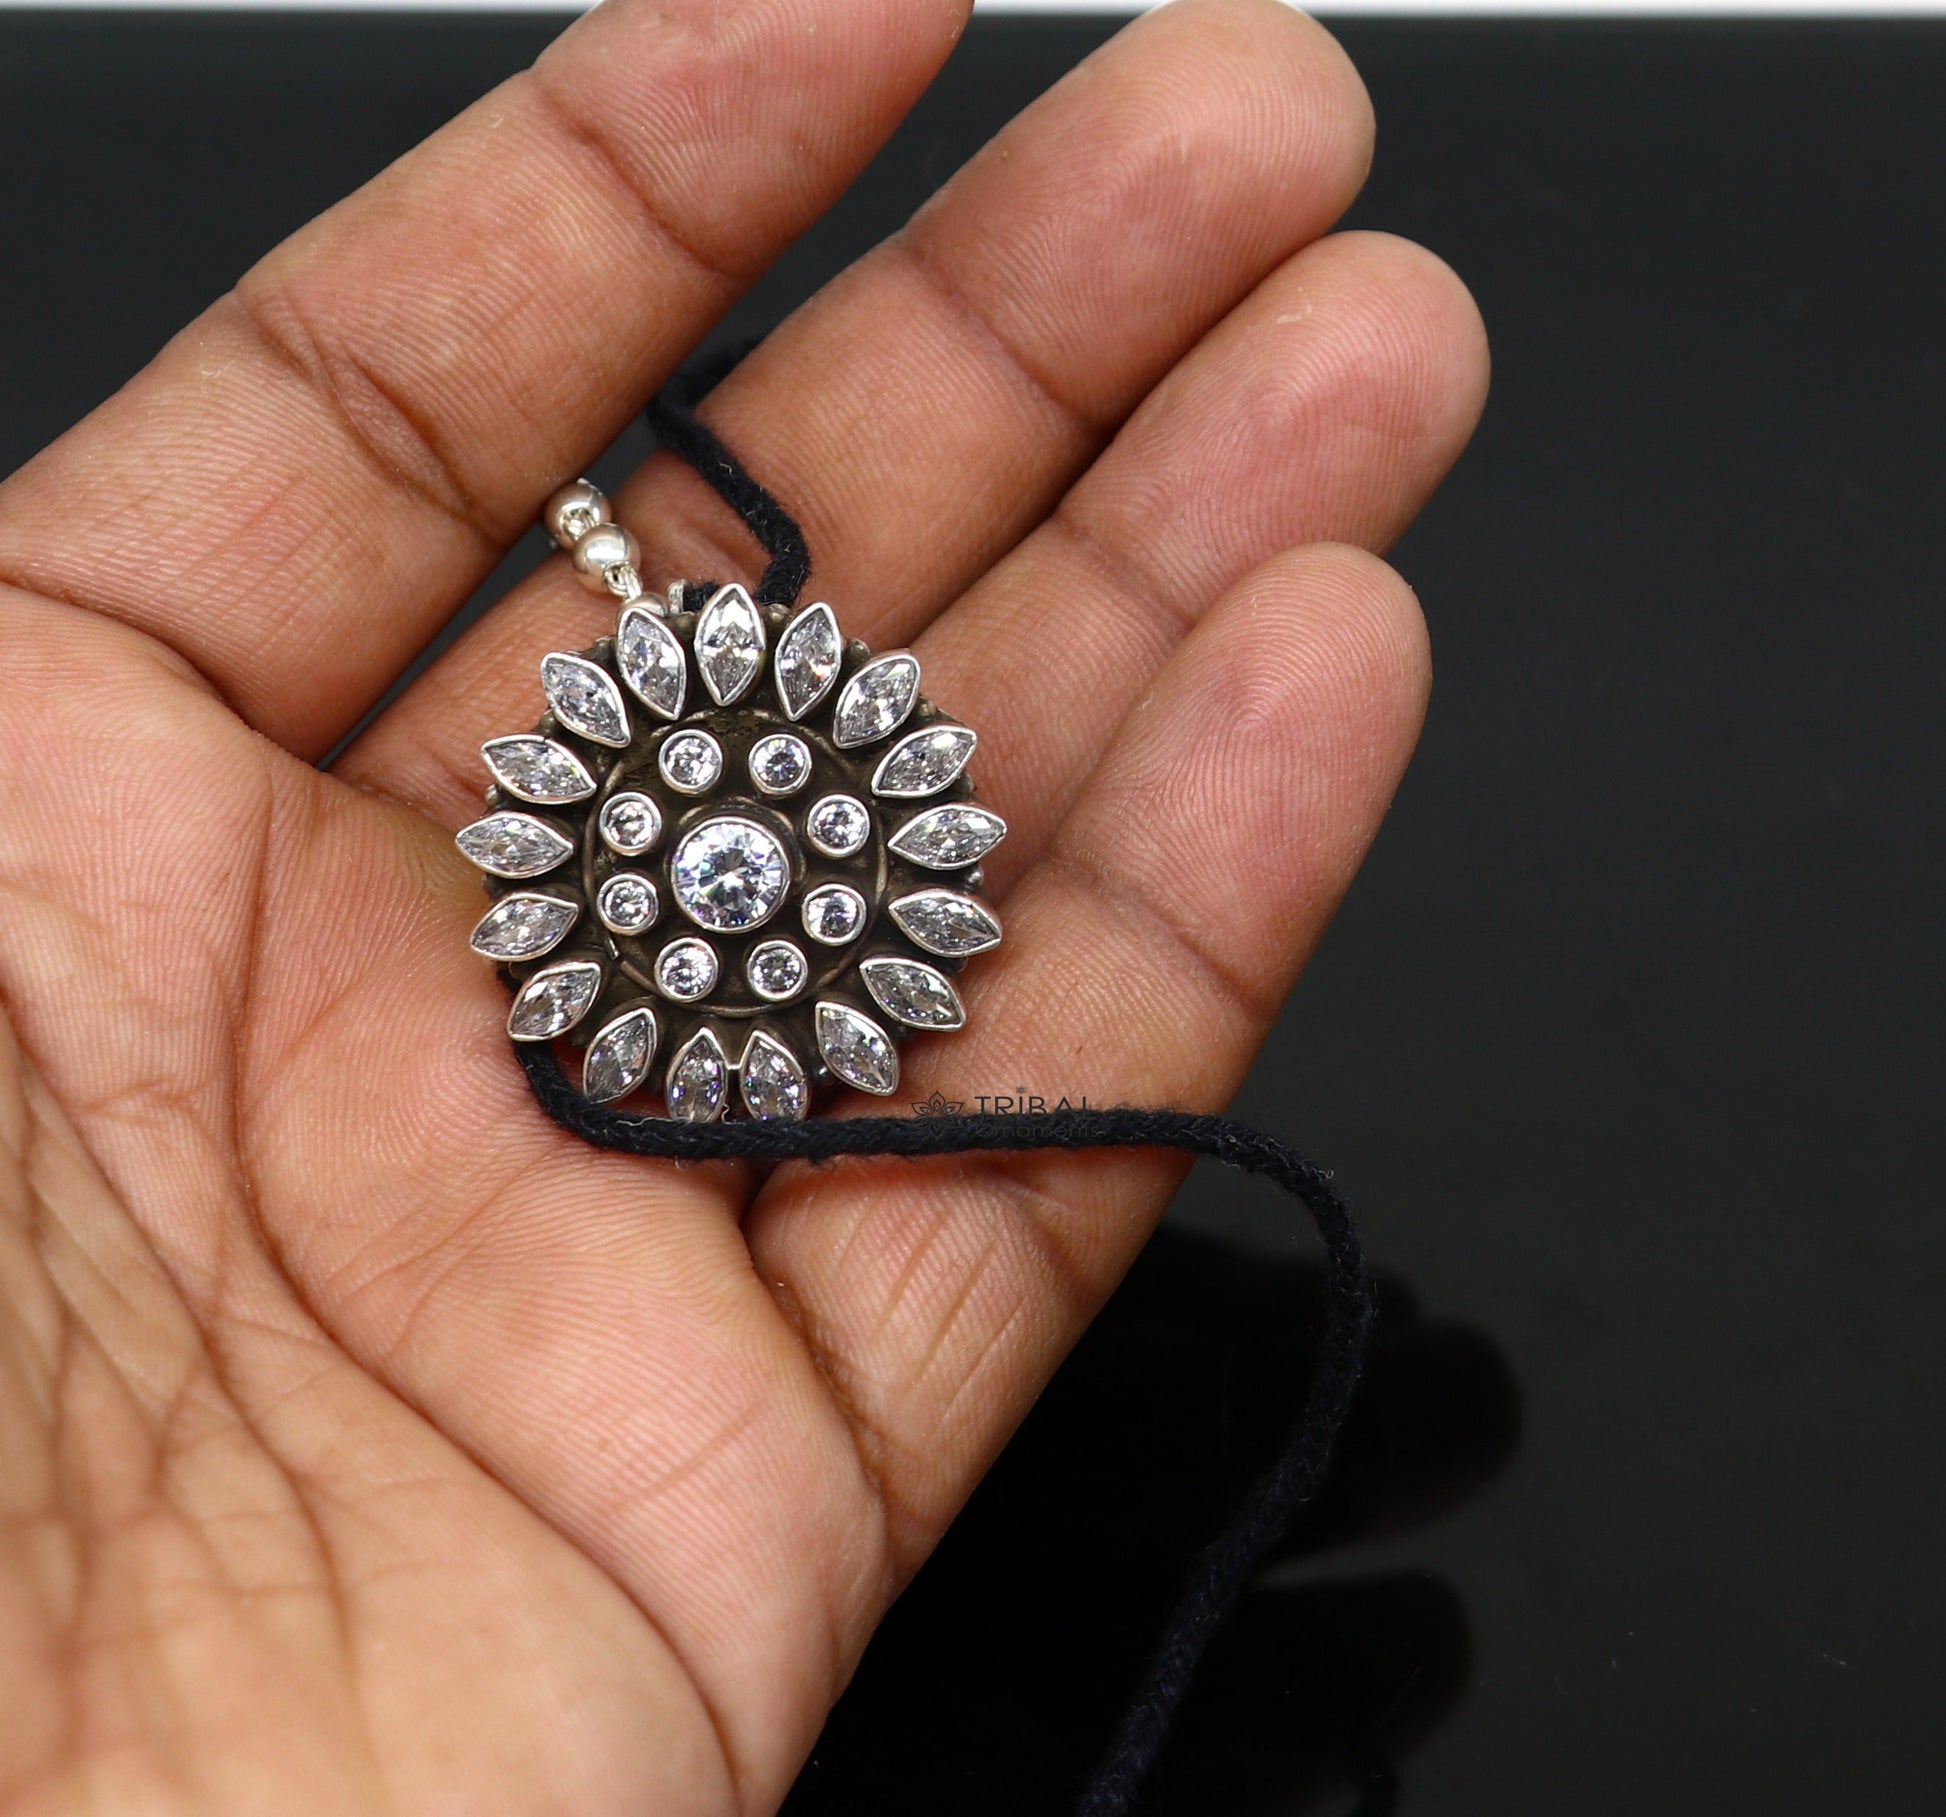 925 sterling silver handmade indian traditional ethnic cultural design Mangtika or head jewelry hair jewelry, silver ball hair jewelry MT33 - TRIBAL ORNAMENTS